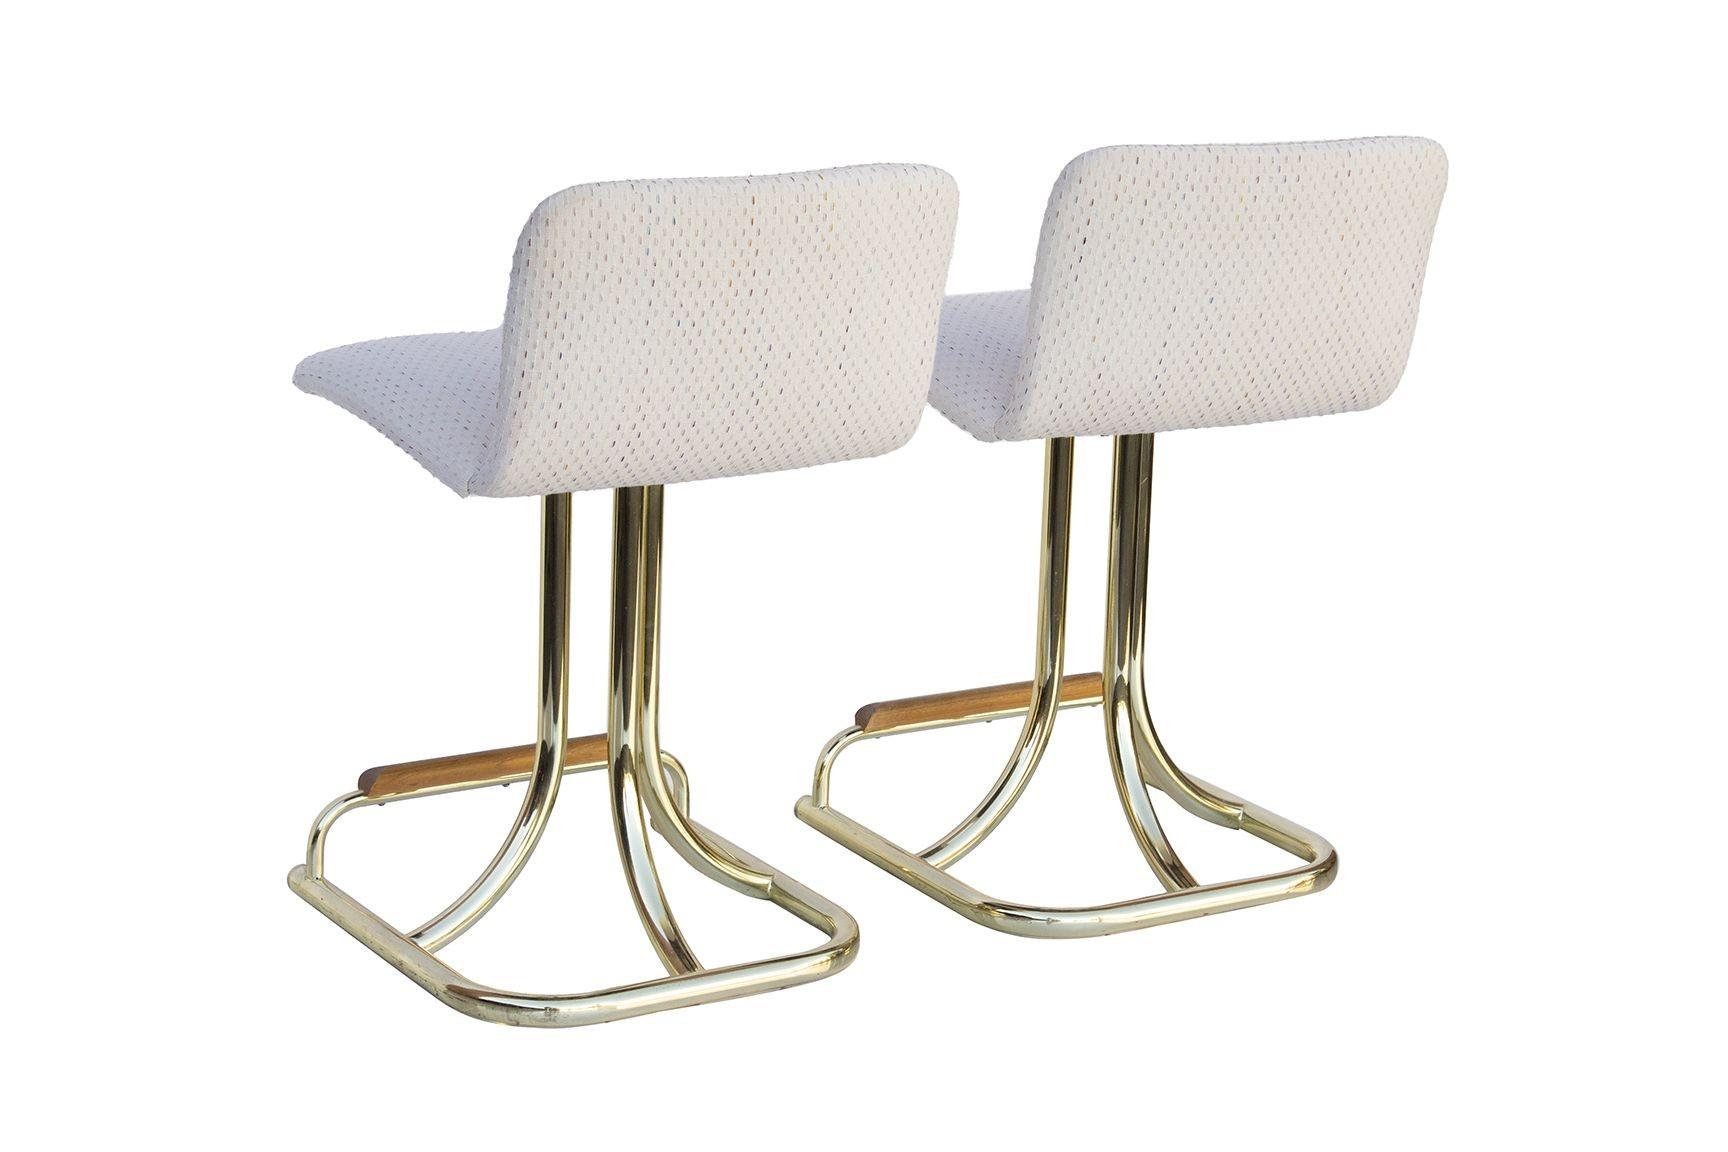 Late 20th Century Swivel Barstools with Brass Tubular Bases, Pair For Sale